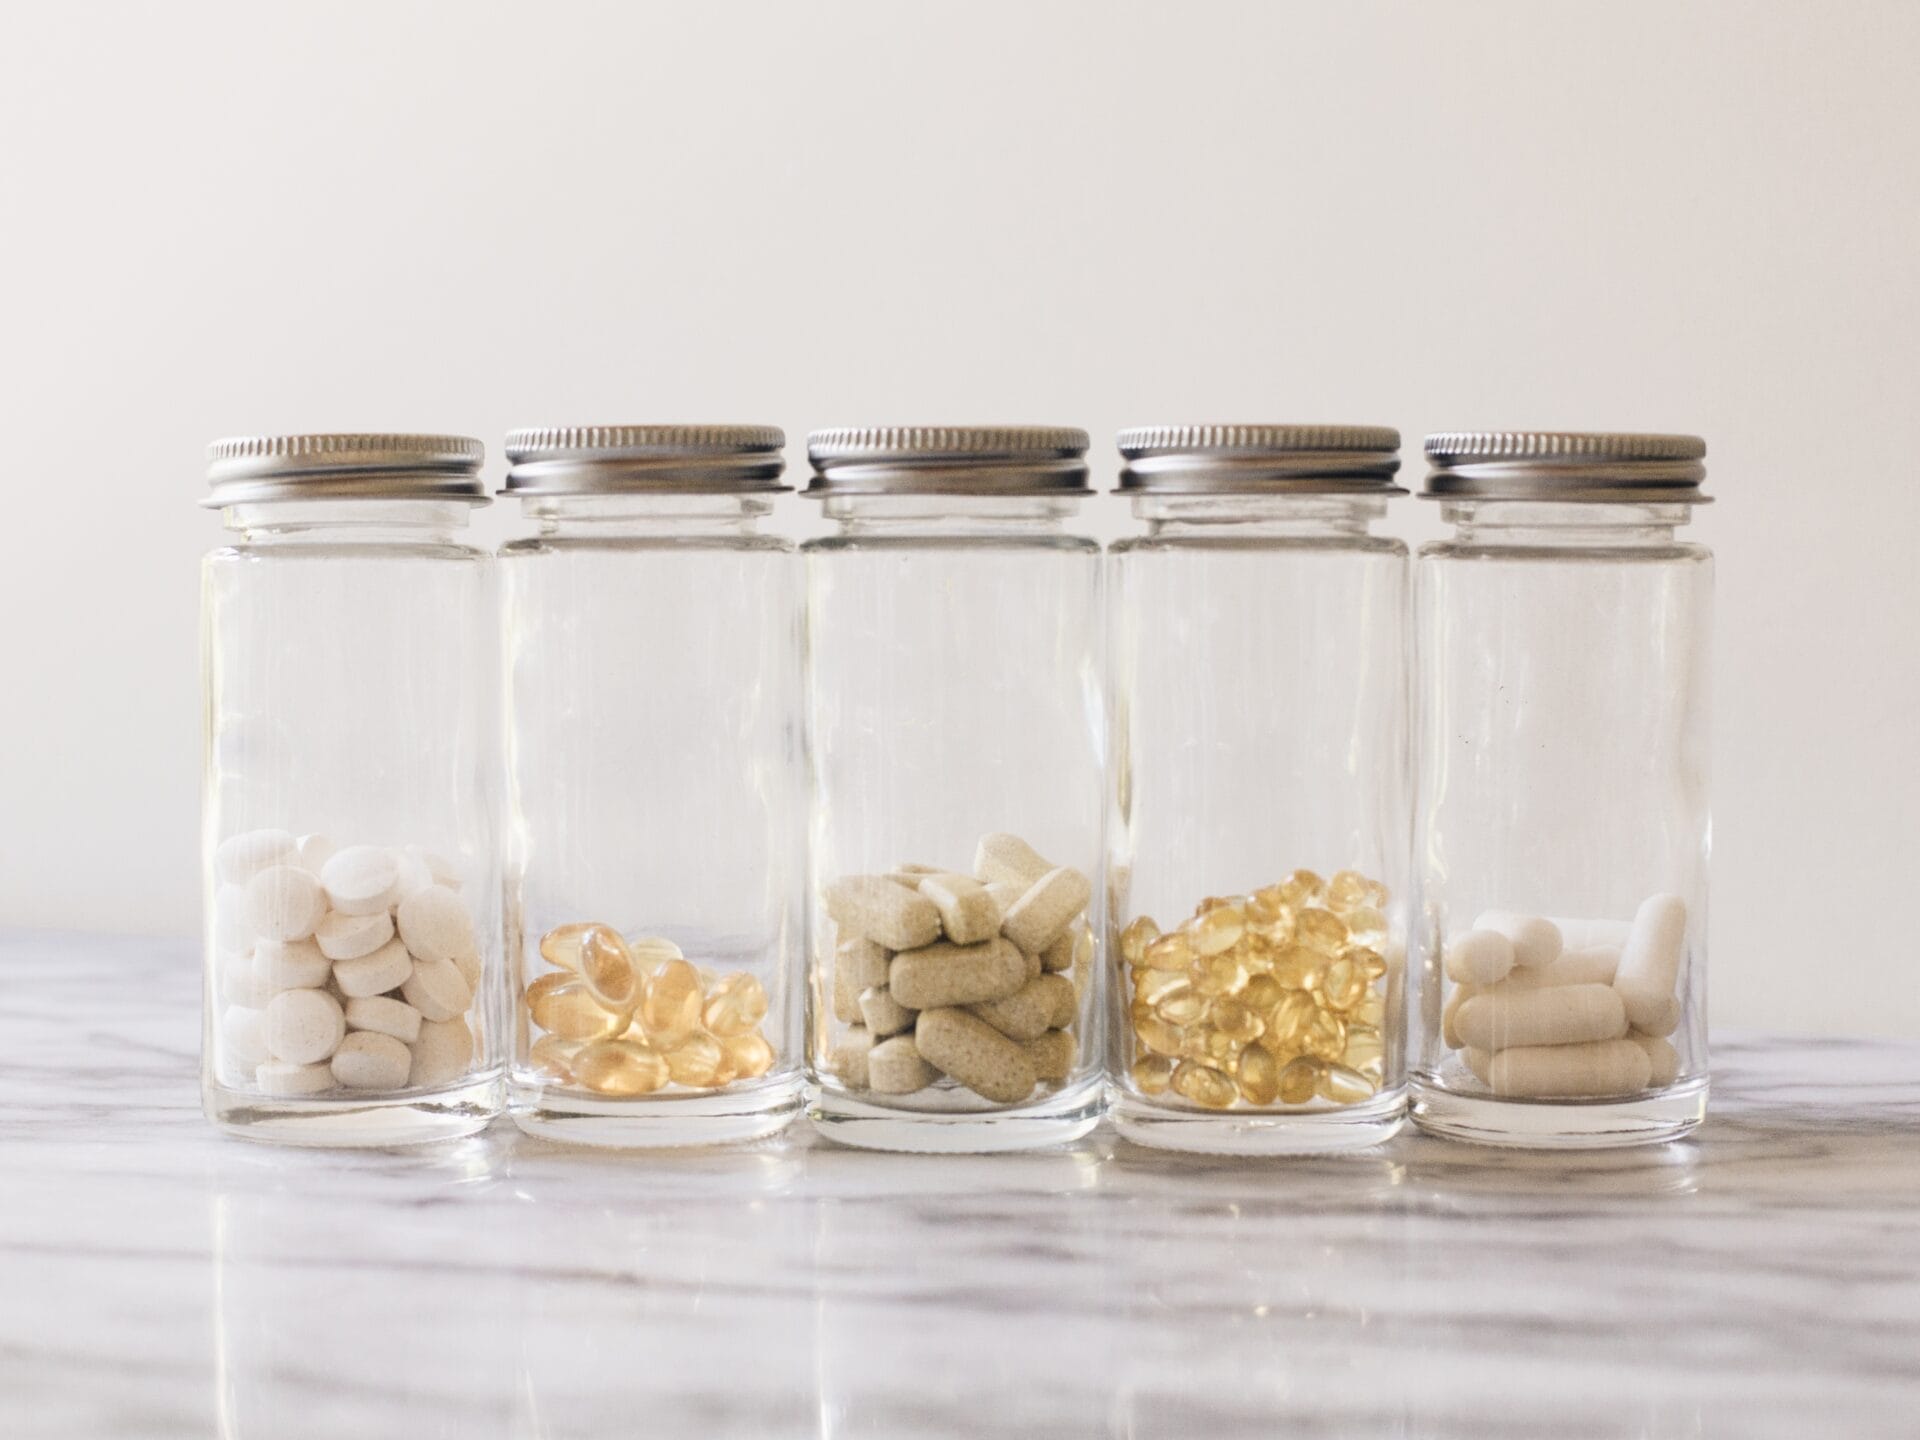 What the Science Says About the Health Benefits of Vitamins and Supplements